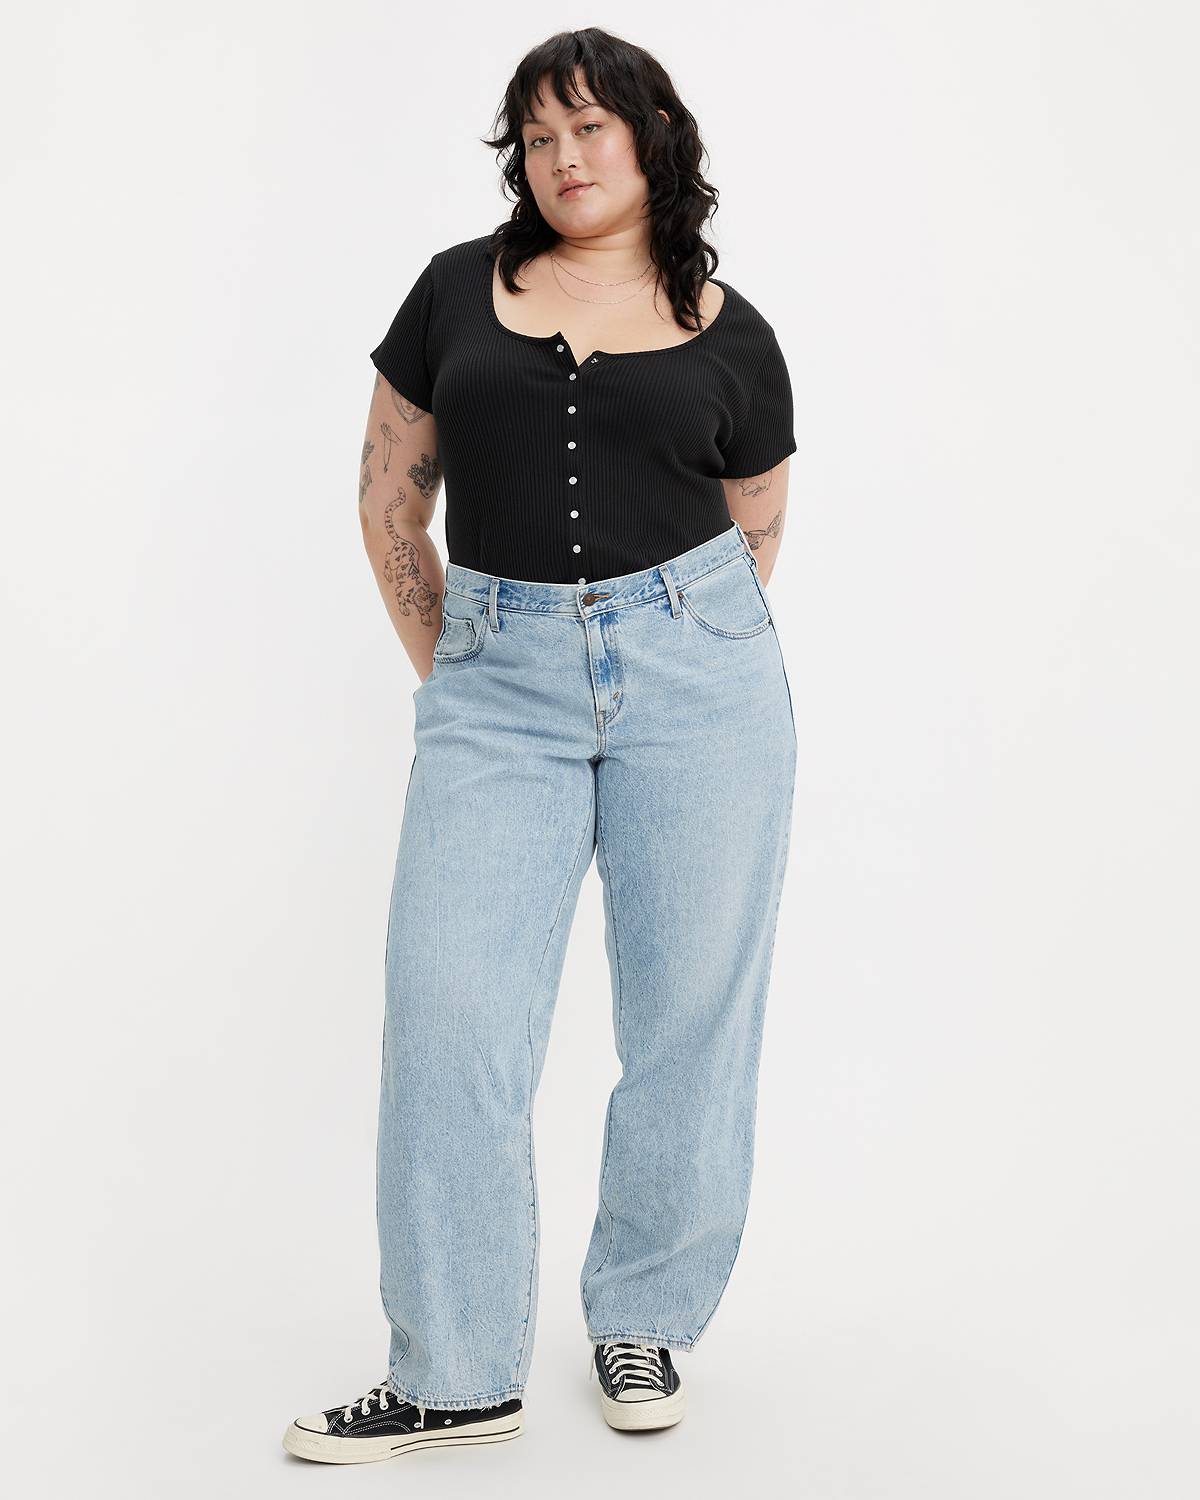 Women's High-Waisted Bottoms - Jeans, Shorts & Skirts | Levi's® US